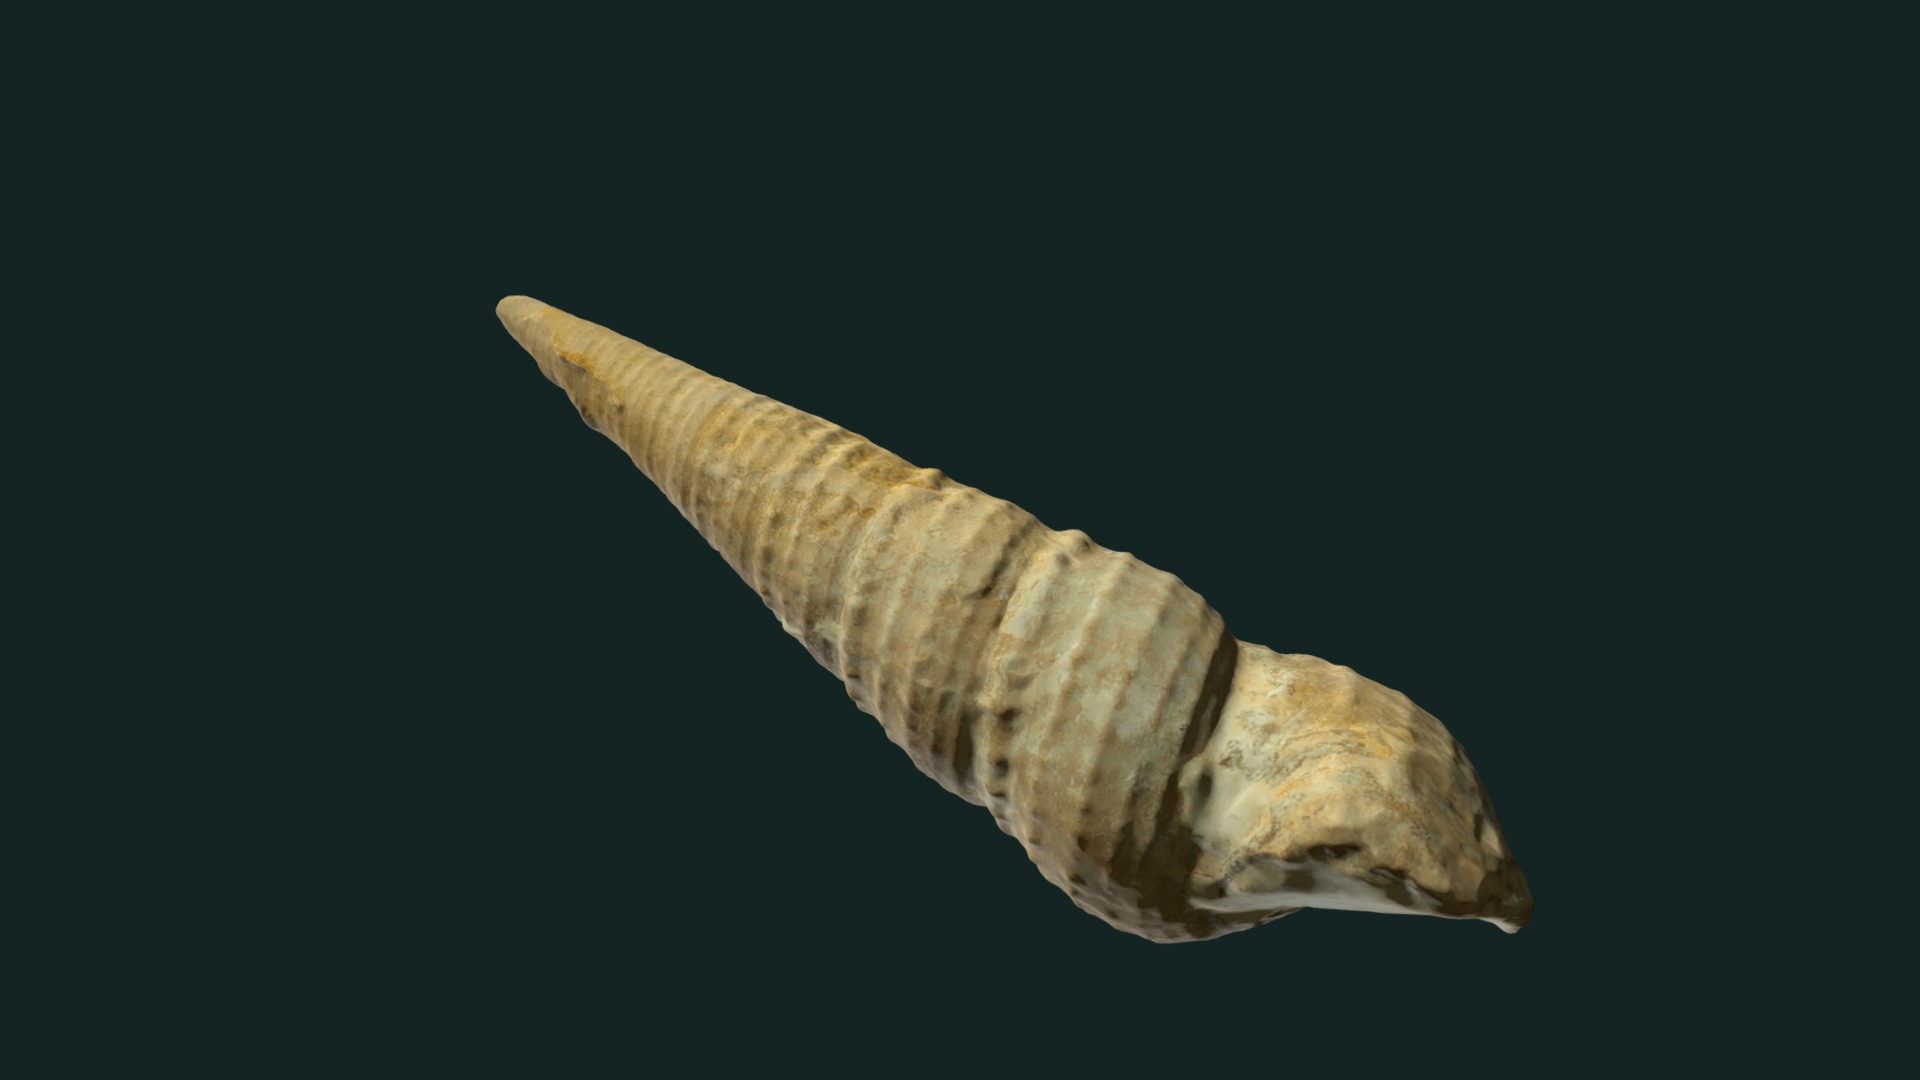 3D model Turritella seriatim-granulata - This is a 3D model of the Turritella seriatim-granulata. The 3D model is about a brown and white snake.